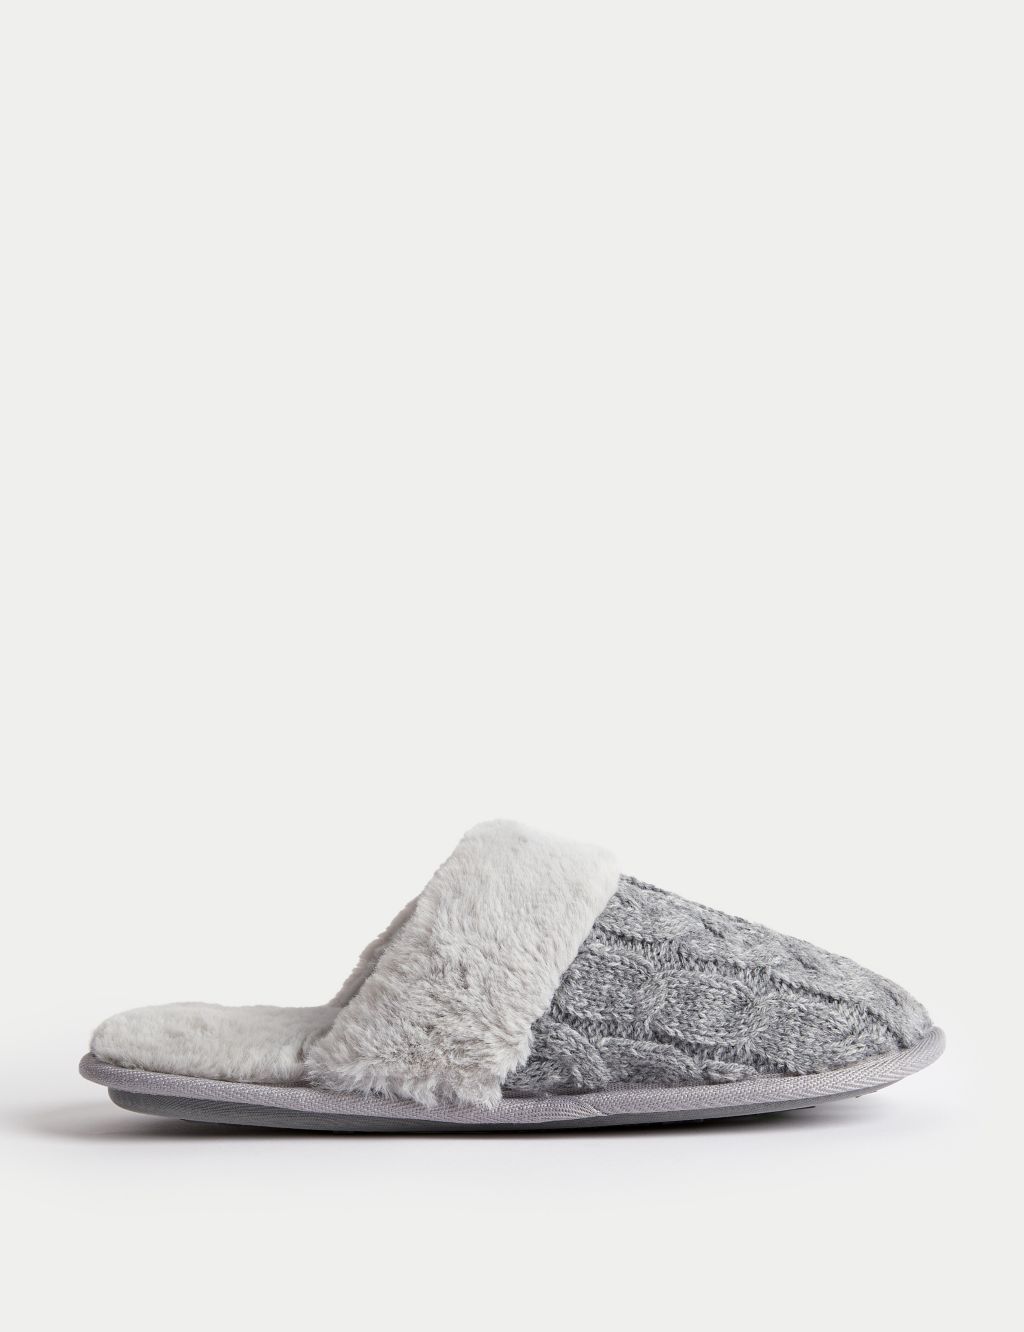 Cable Knit Faux Fur Lined Mule Slippers image 1